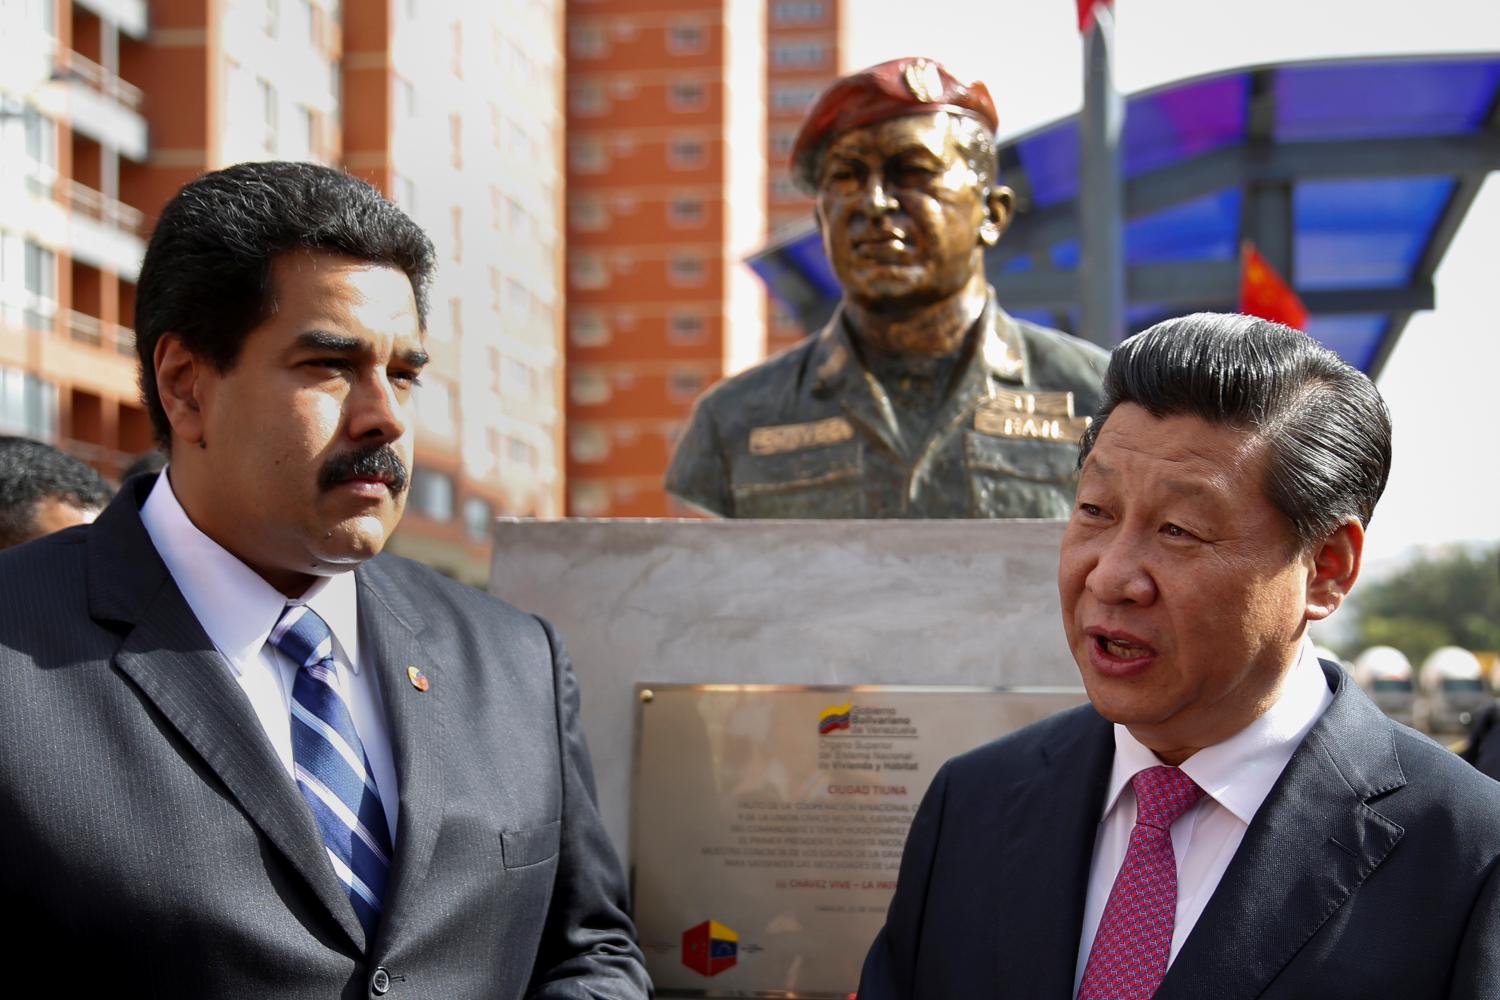 FILE PHOTO: FILE PHOTO: China's President Xi Jinping (R) speaks with Venezuela's President Nicolas Maduro in front of a statue of Venezuela's late president Hugo Chavez during a ceremony in Caracas July 21, 2014. China will provide Venezuela with a $4 billion credit line under an agreement signed on Monday, with the money to be repaid by oil shipments from OPEC member Venezuela. The deal was inked during a 24-hour visit to Venezuela by Xi, who is on a tour of Latin America. REUTERS/Carlos Garcia Rawlins/File Photo